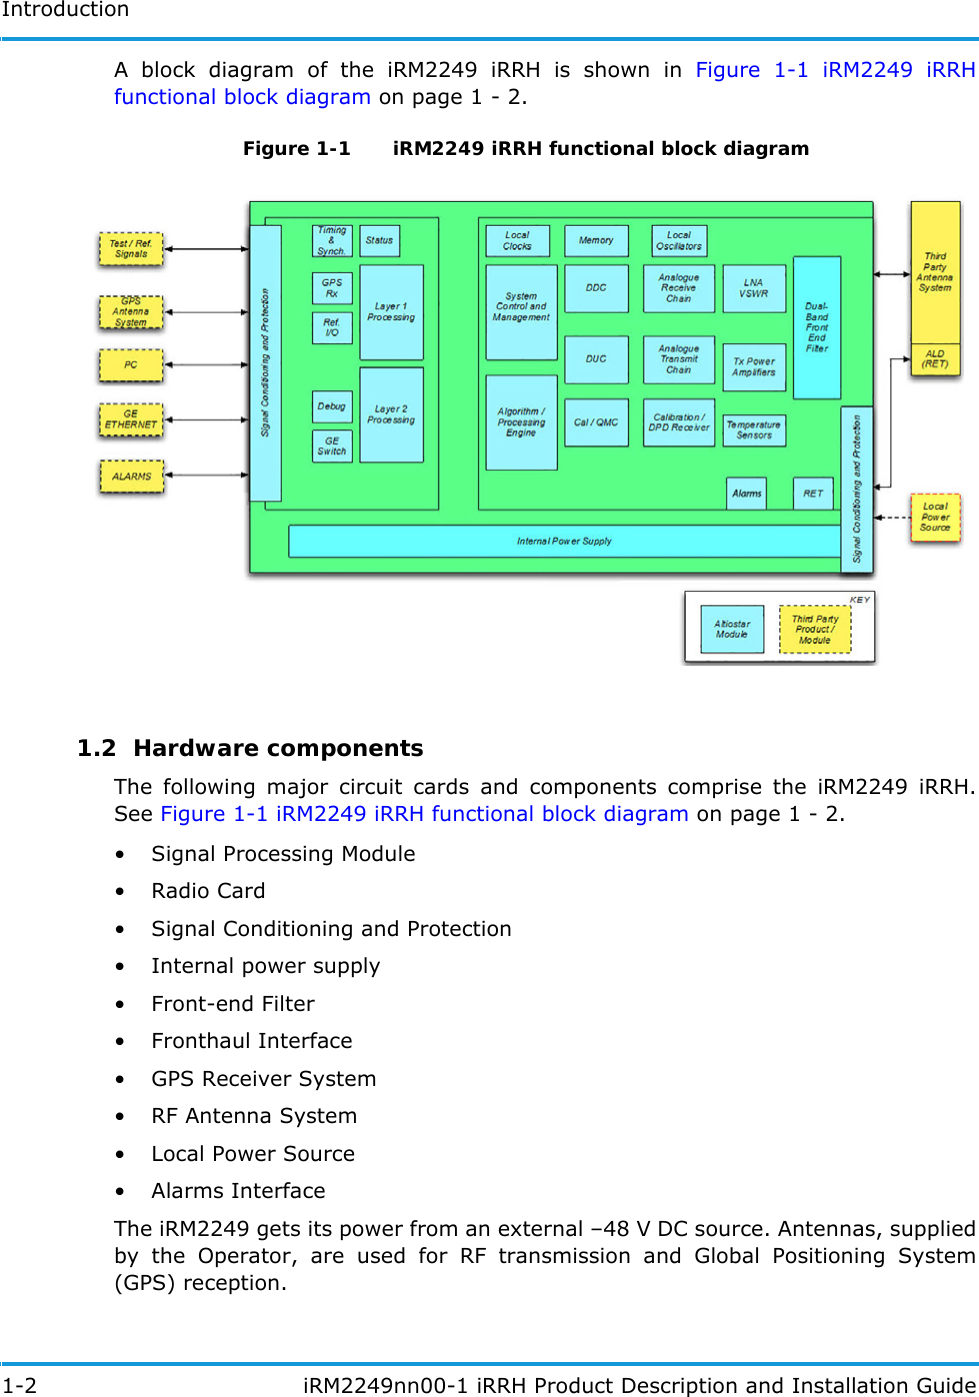 Introduction1-2  iRM2249nn00-1 iRRH Product Description and Installation GuideA block diagram of the iRM2249 iRRH is shown in Figure 1-1 iRM2249 iRRH functional block diagram on page 1 - 2.Figure 1-1   iRM2249 iRRH functional block diagram 1.2  Hardware componentsThe following major circuit cards and components comprise the iRM2249 iRRH. See Figure 1-1 iRM2249 iRRH functional block diagram on page 1 - 2.• Signal Processing Module•Radio Card• Signal Conditioning and Protection• Internal power supply• Front-end Filter• Fronthaul Interface• GPS Receiver System• RF Antenna System•Local Power Source• Alarms InterfaceThe iRM2249 gets its power from an external –48 V DC source. Antennas, supplied by the Operator, are used for RF transmission and Global Positioning System (GPS) reception.